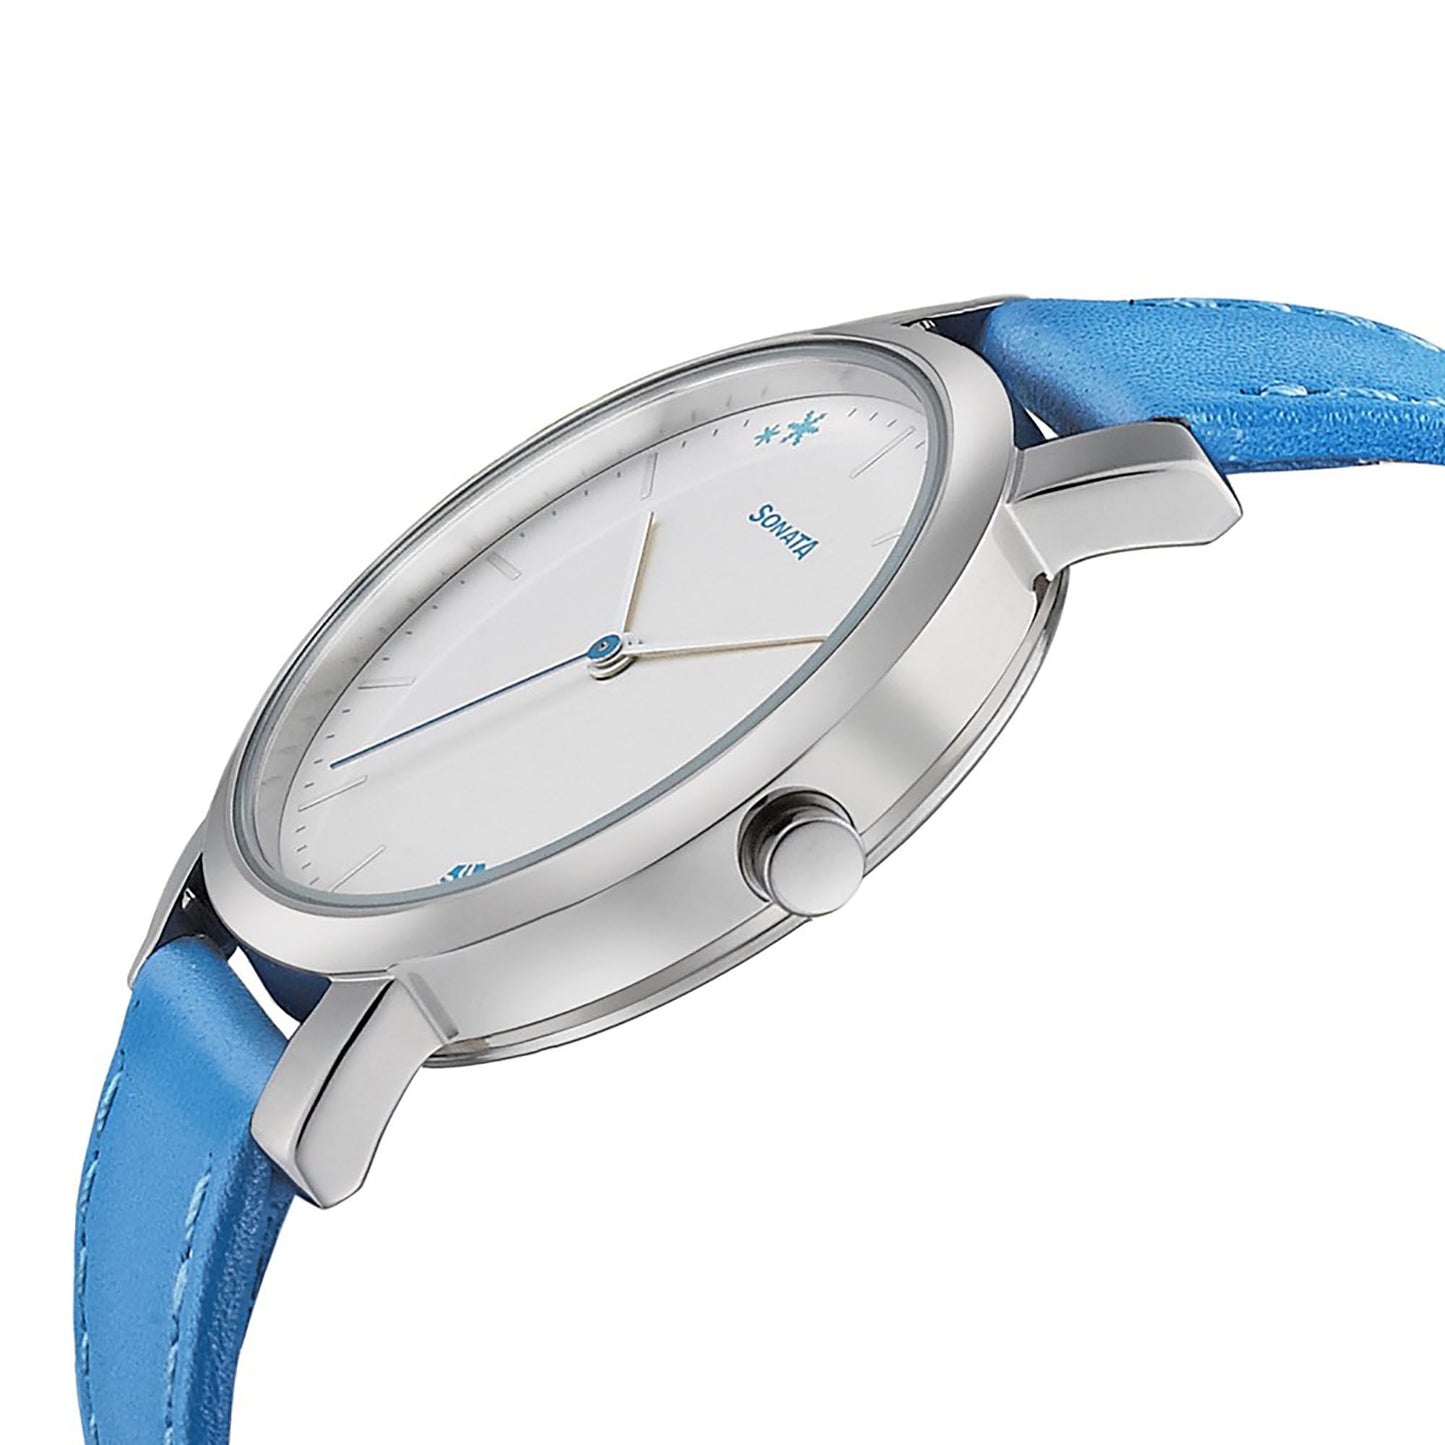 Sonata Play Silver Dial Women Watch With Leather Strap